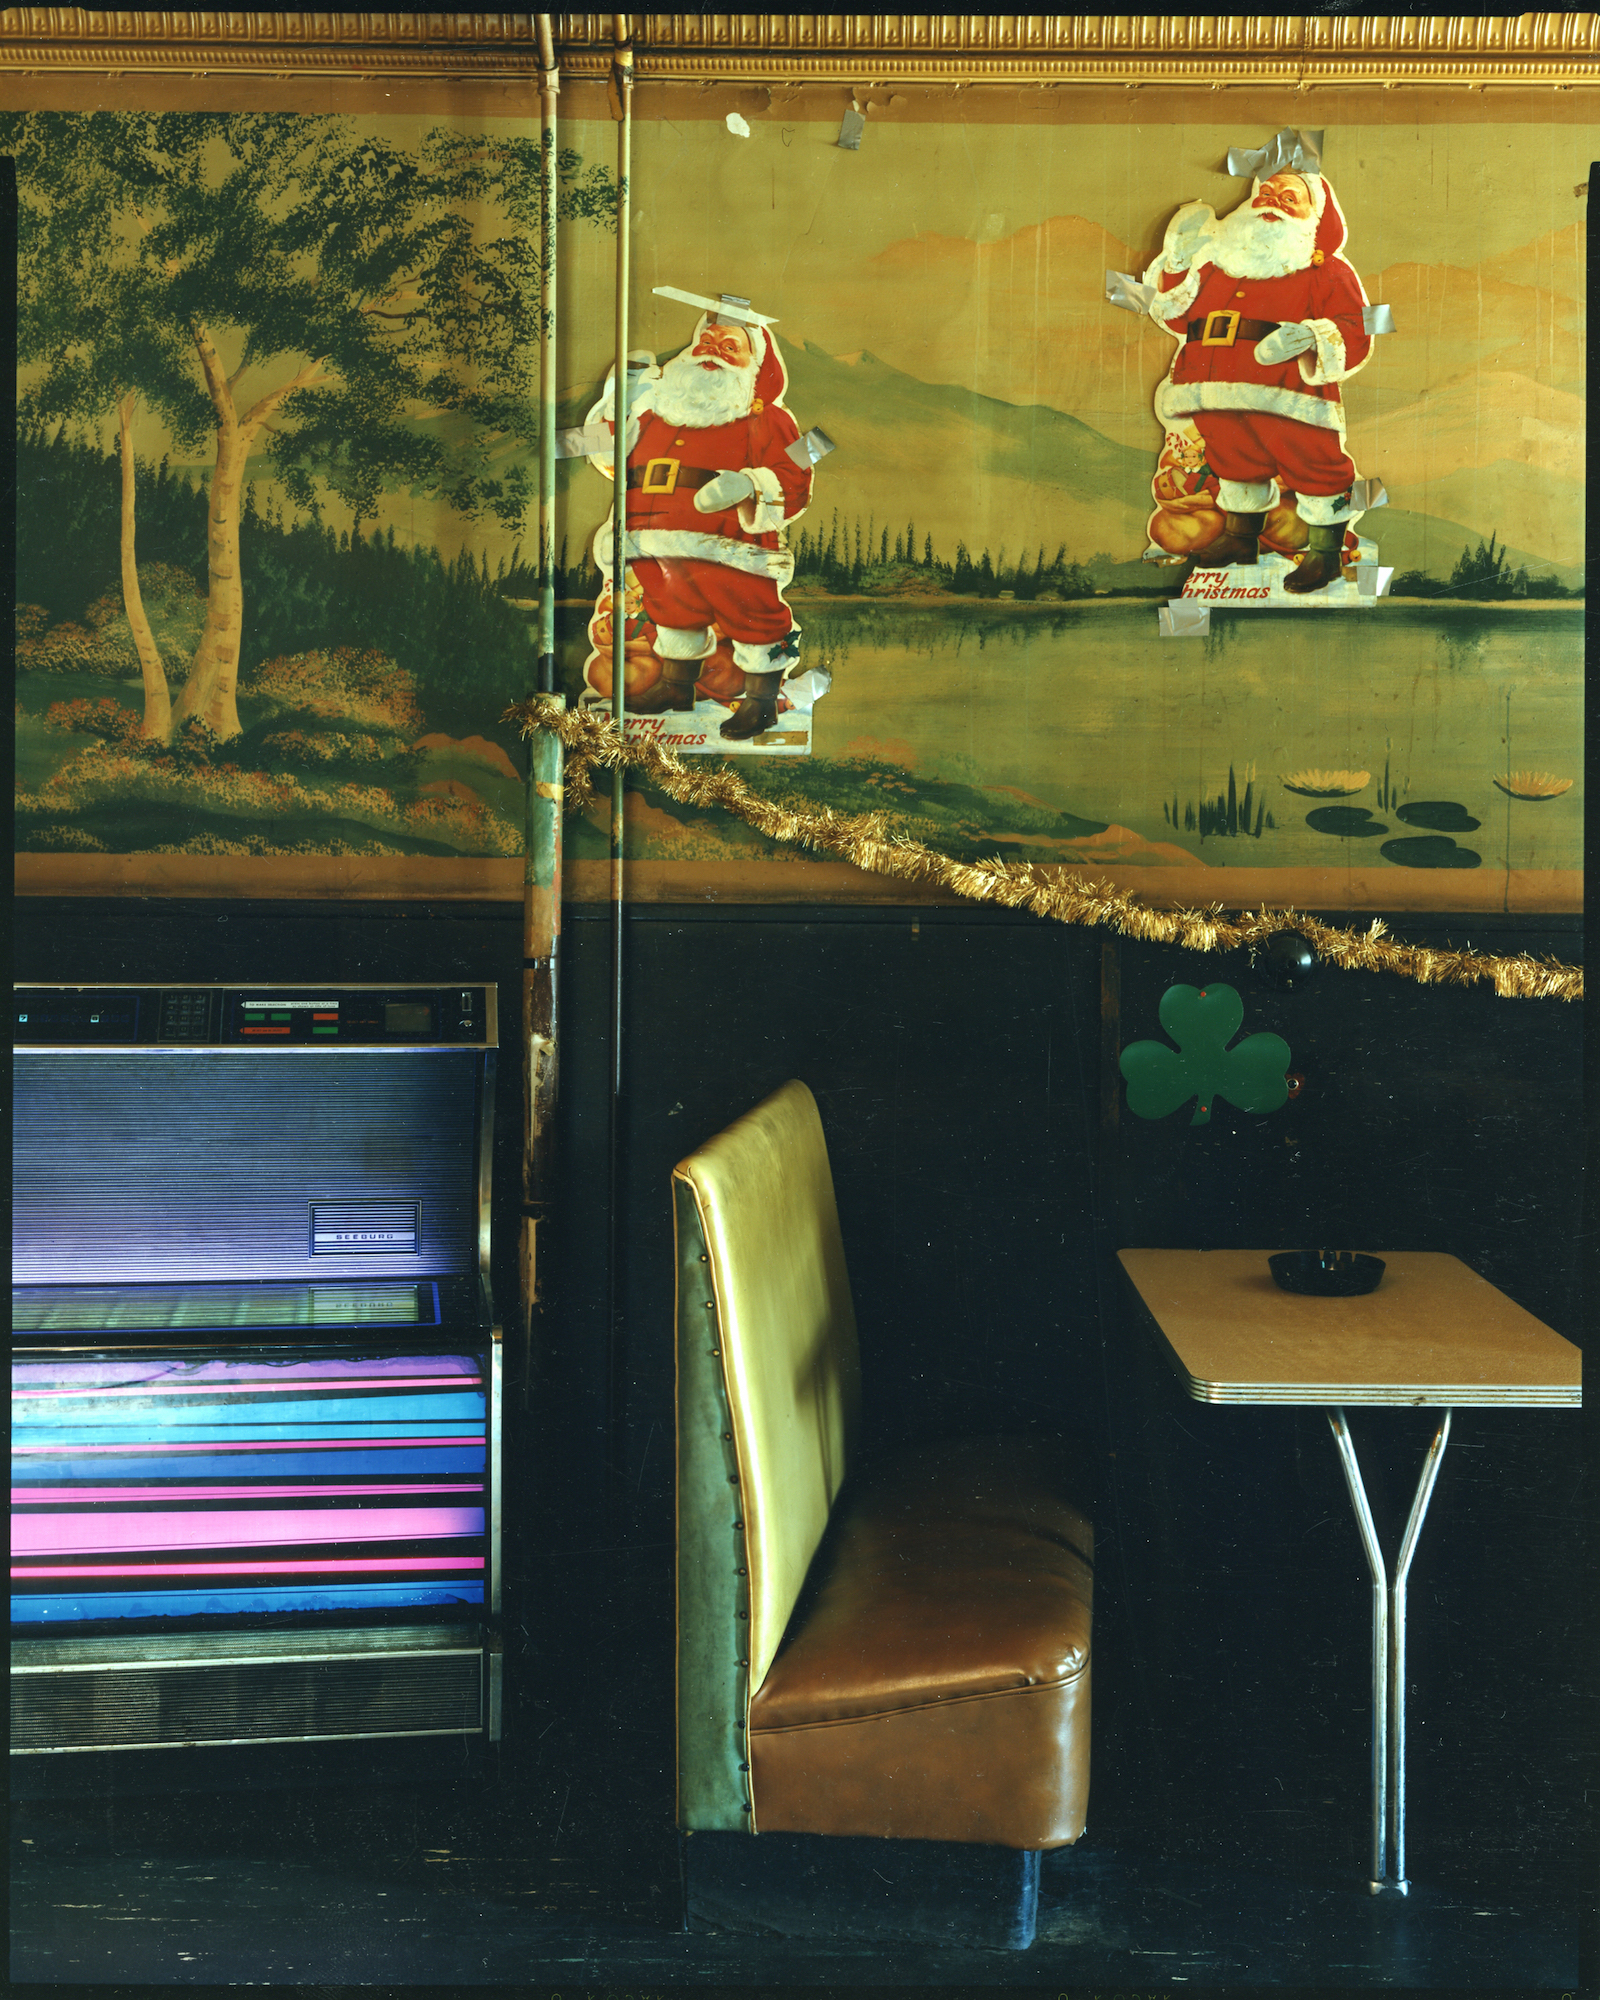 Diner booth with 2 Santa Claus figures above table, 1985